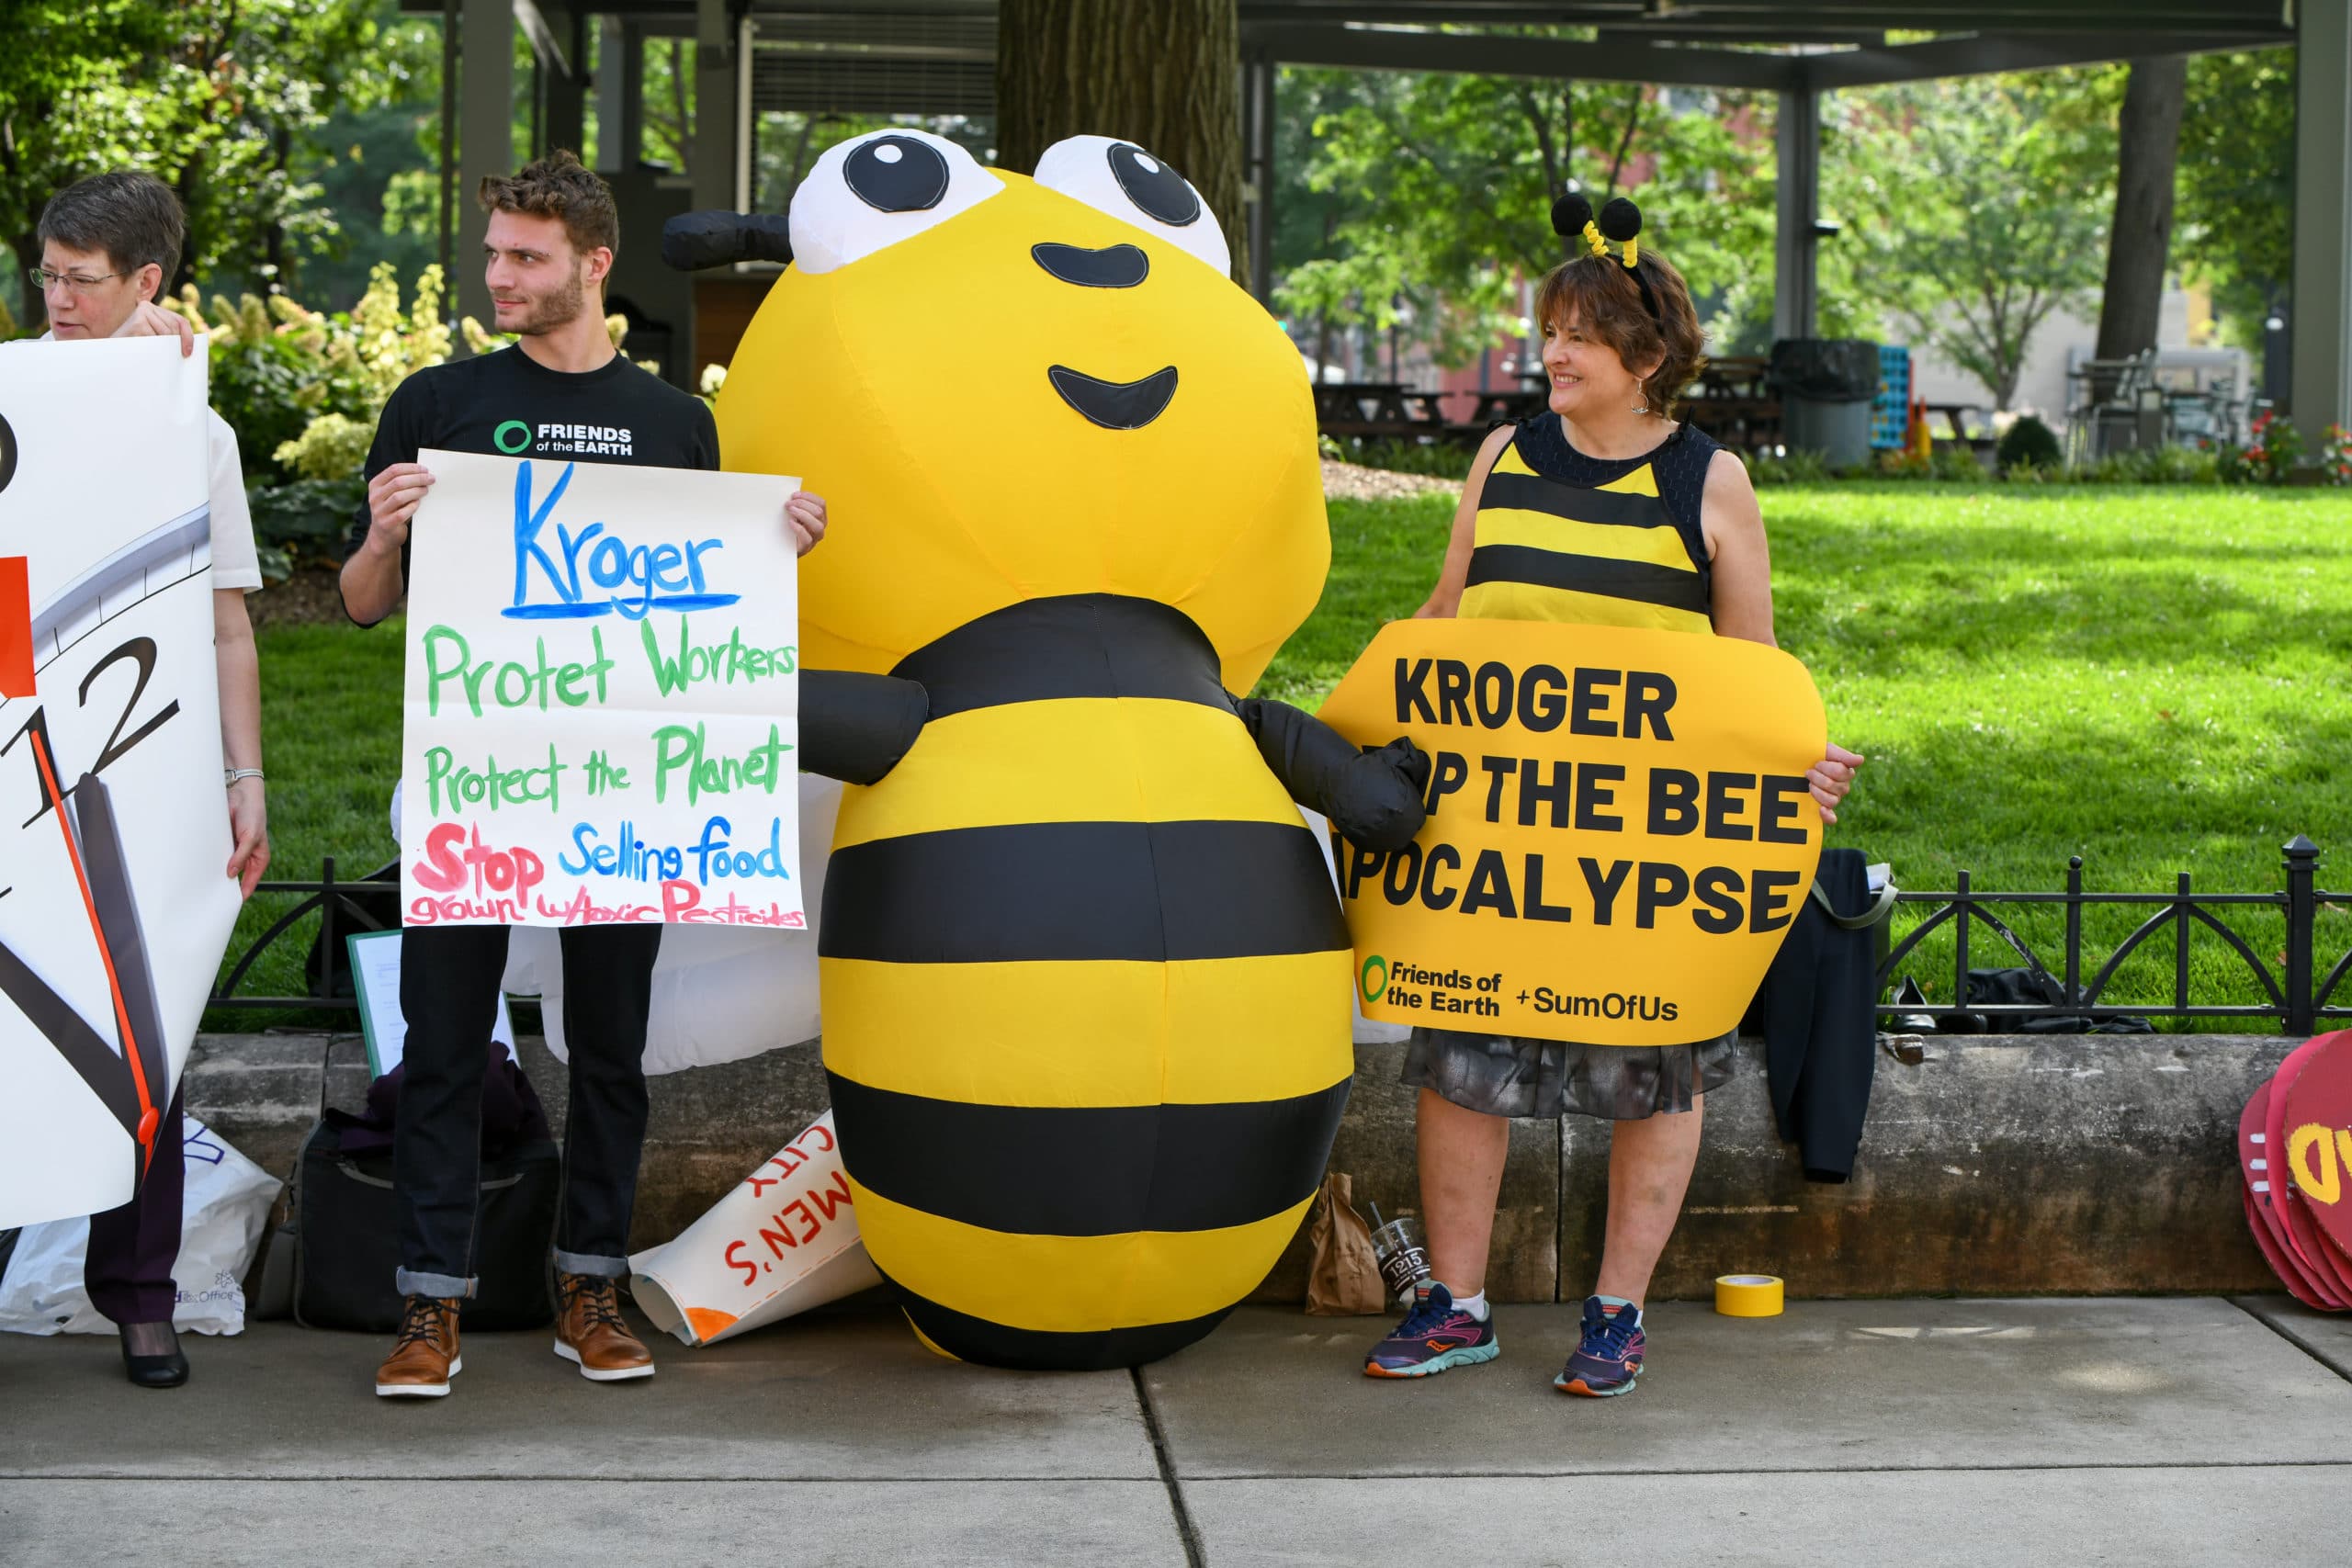 It’s time for Kroger to do better by the bees.